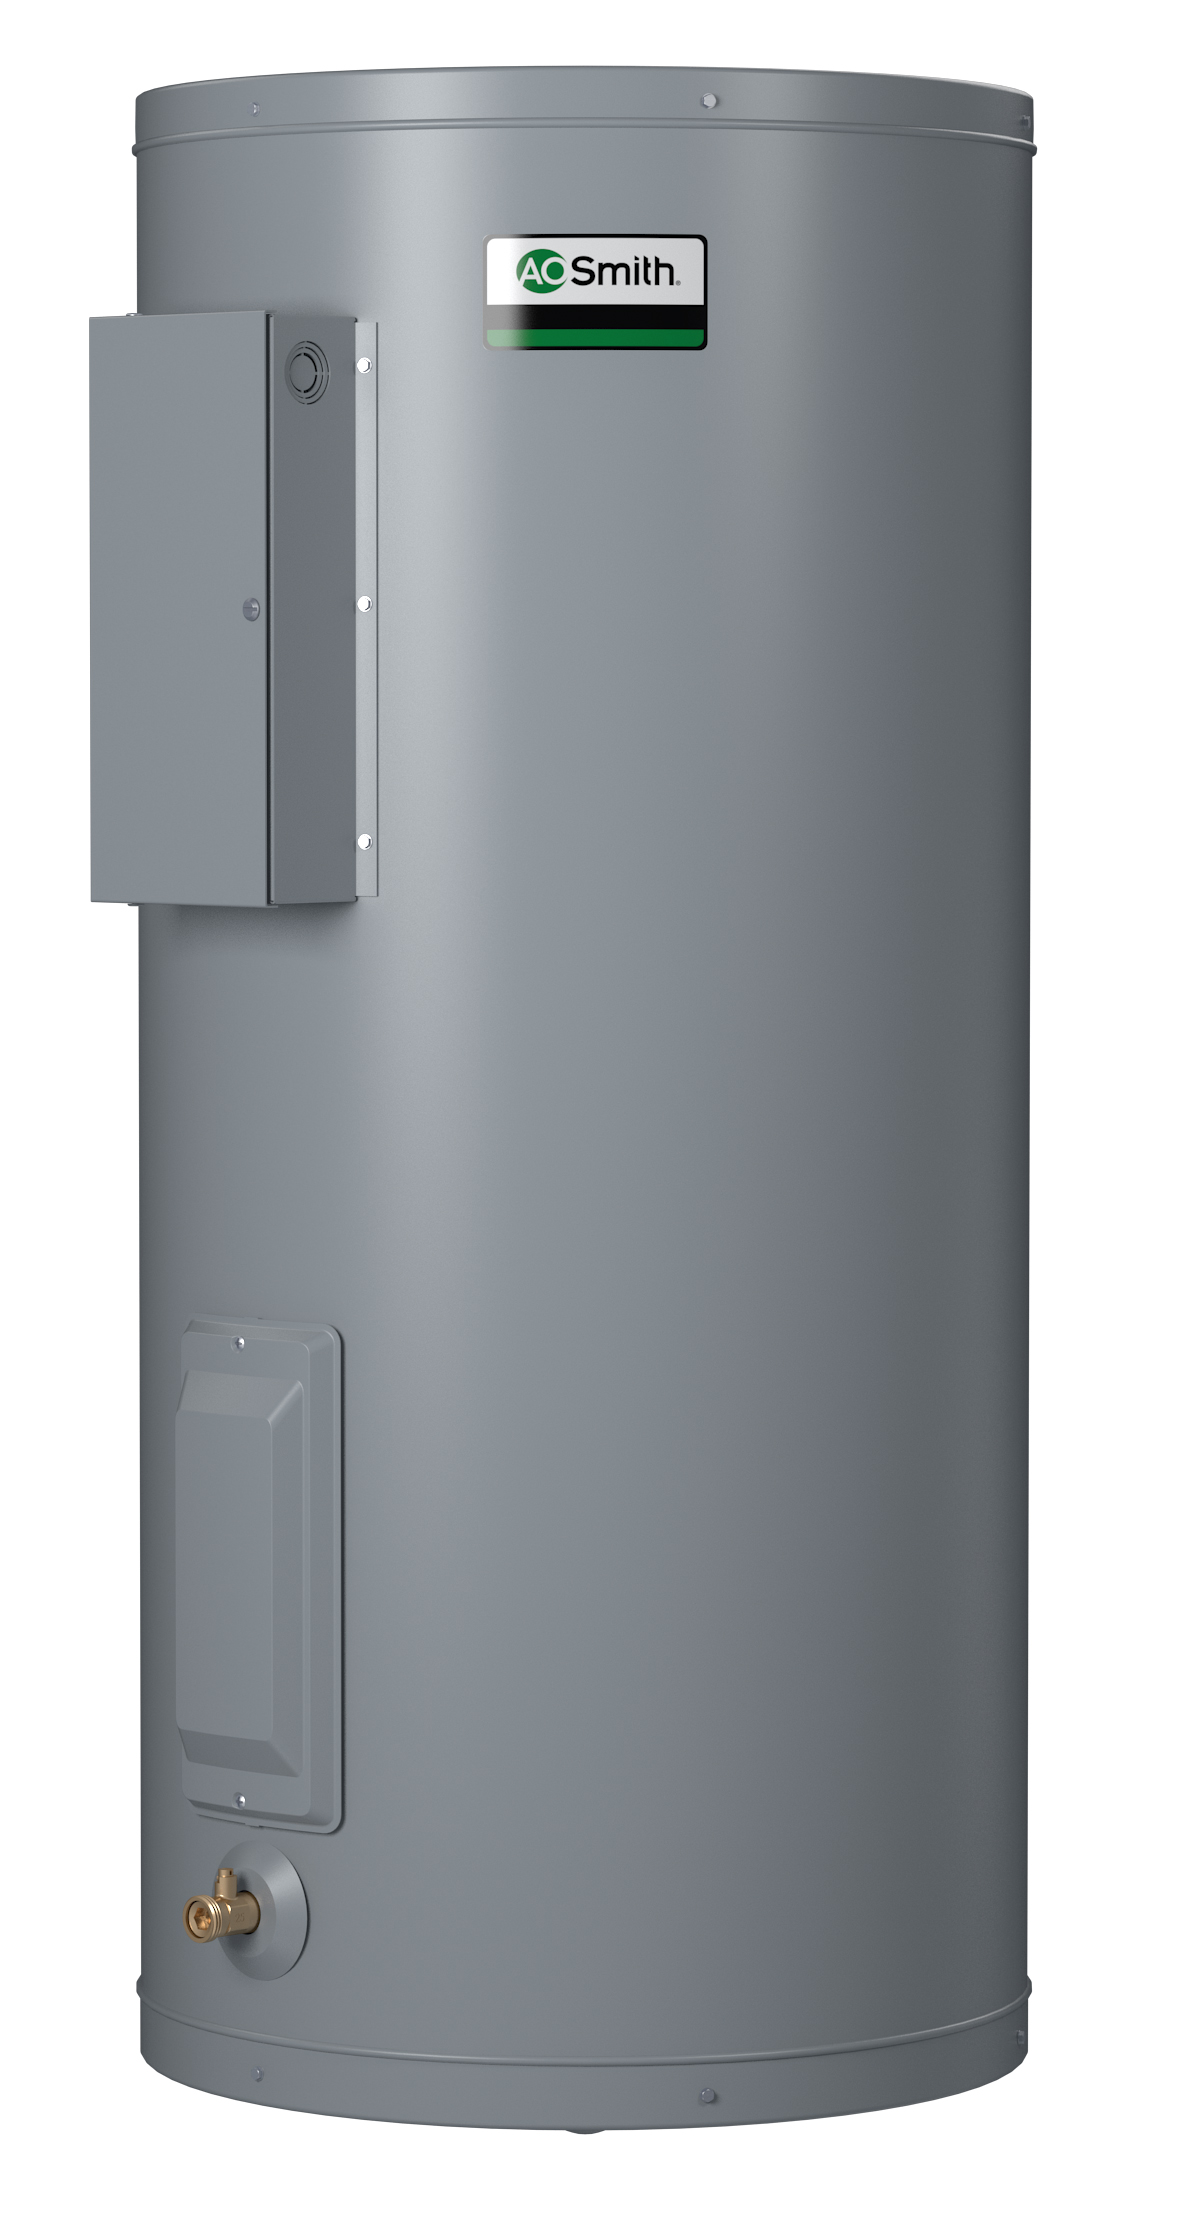 AO SMITH DEN-120D: 120 GALLONS, 2.0KW, 120 VOLT, 1 PHASE, (2-2000 WATT ELEMENTS, NON-SIMULTANEOUS WIRING), DURA-POWER, LIGHT DUTY COMMERCIAL ELECTRIC WATER HEATER